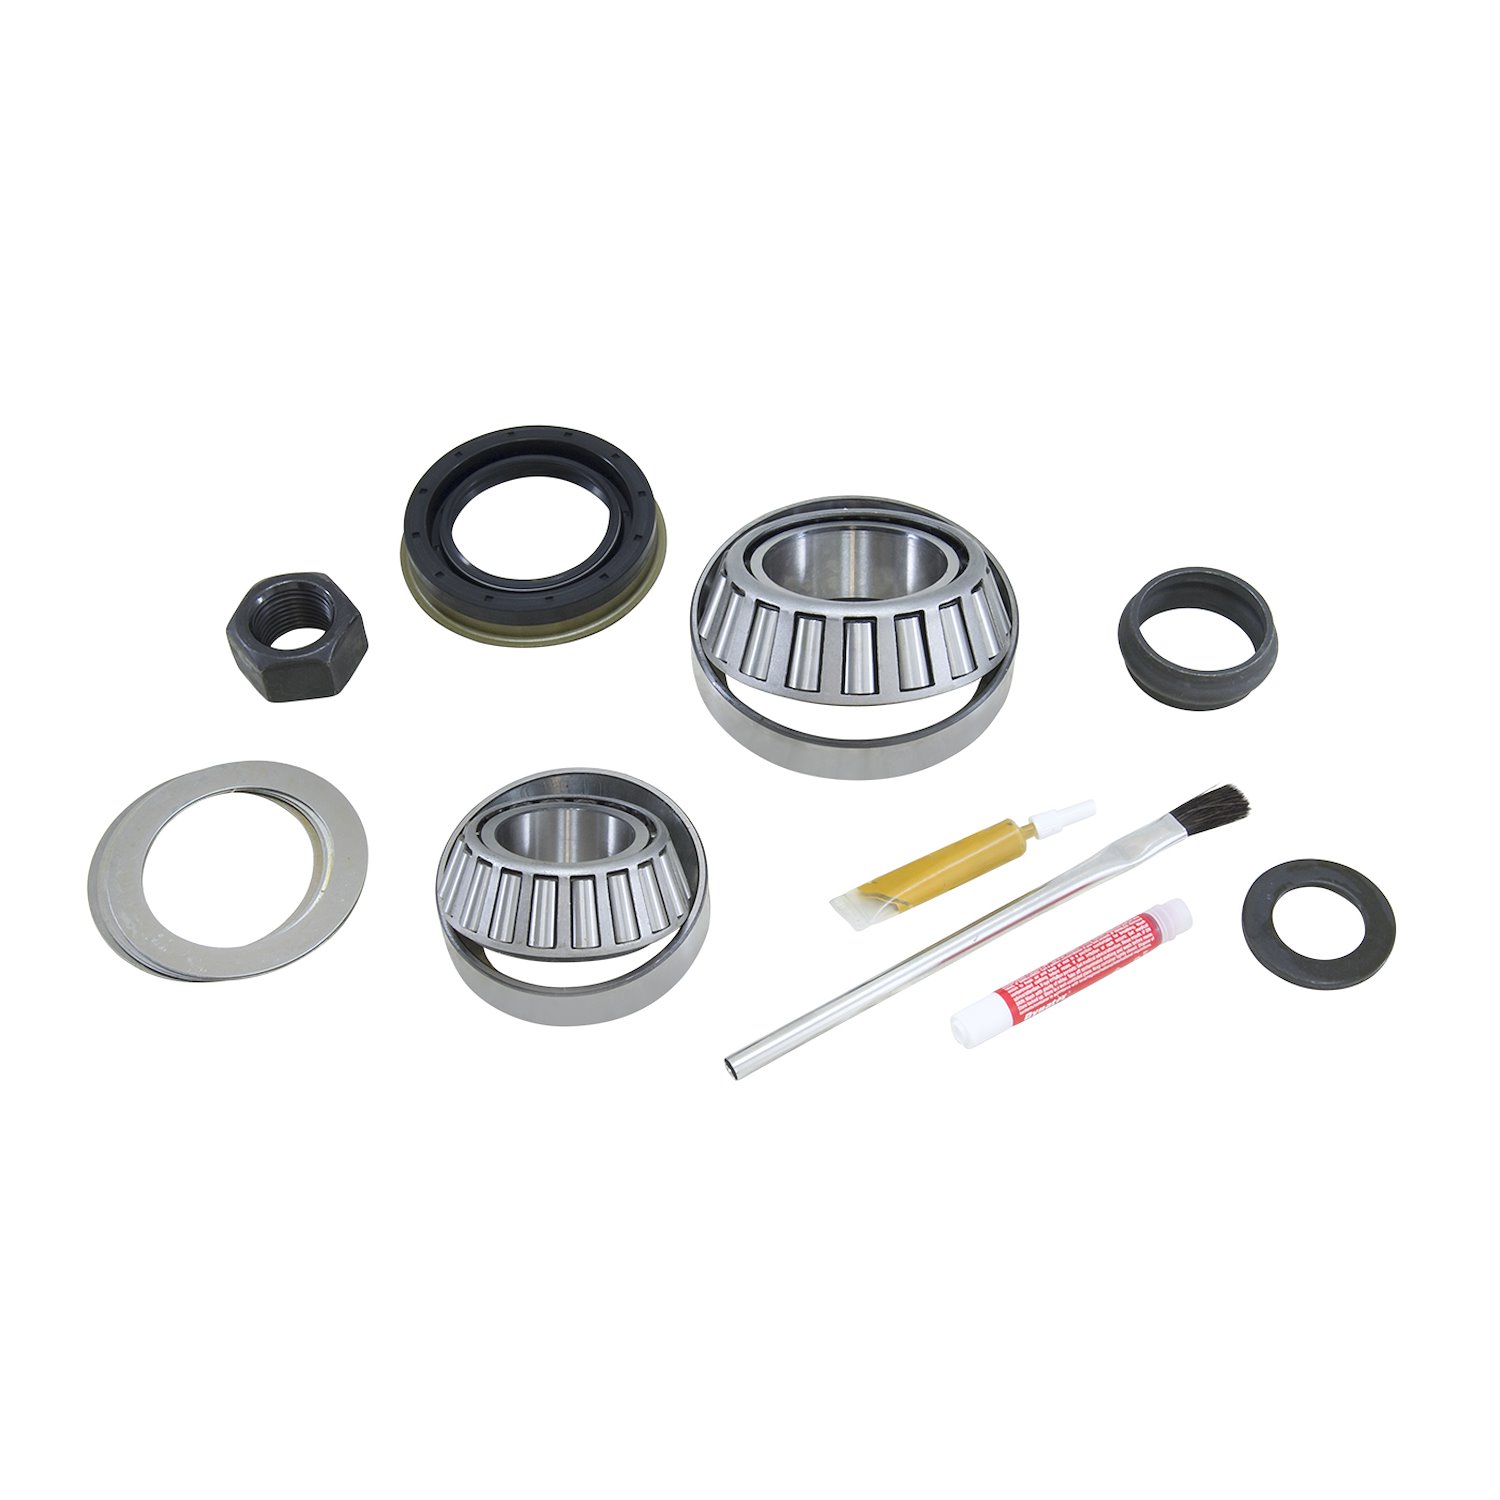 Pinion Install Kit For Dana 30 Differential, With